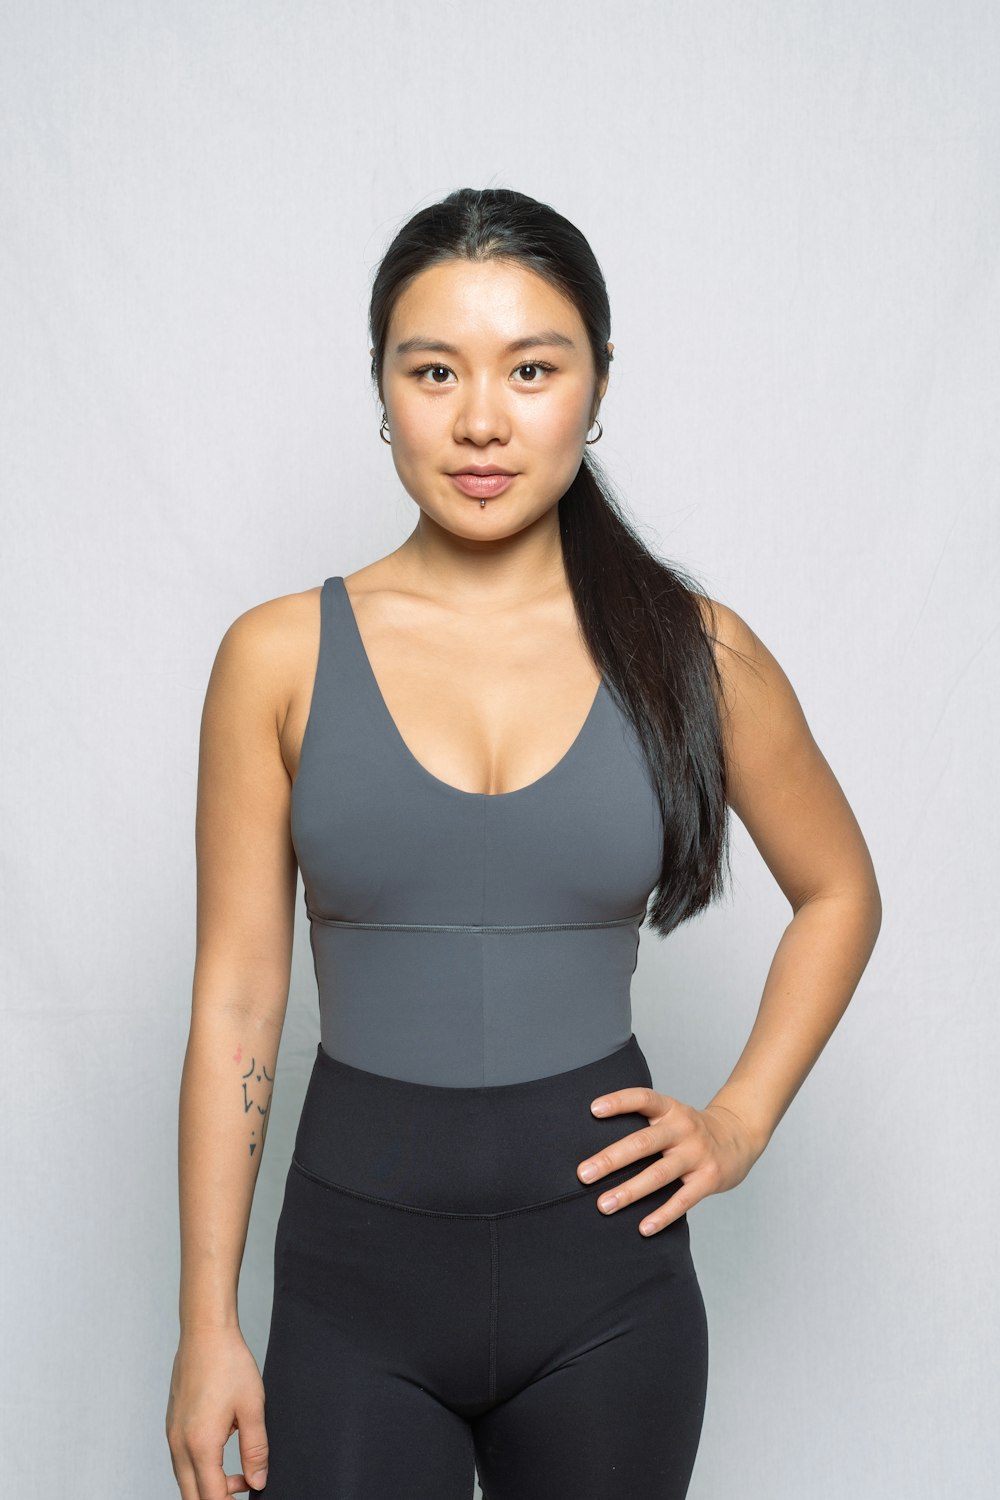 a woman posing for a picture in a gray top